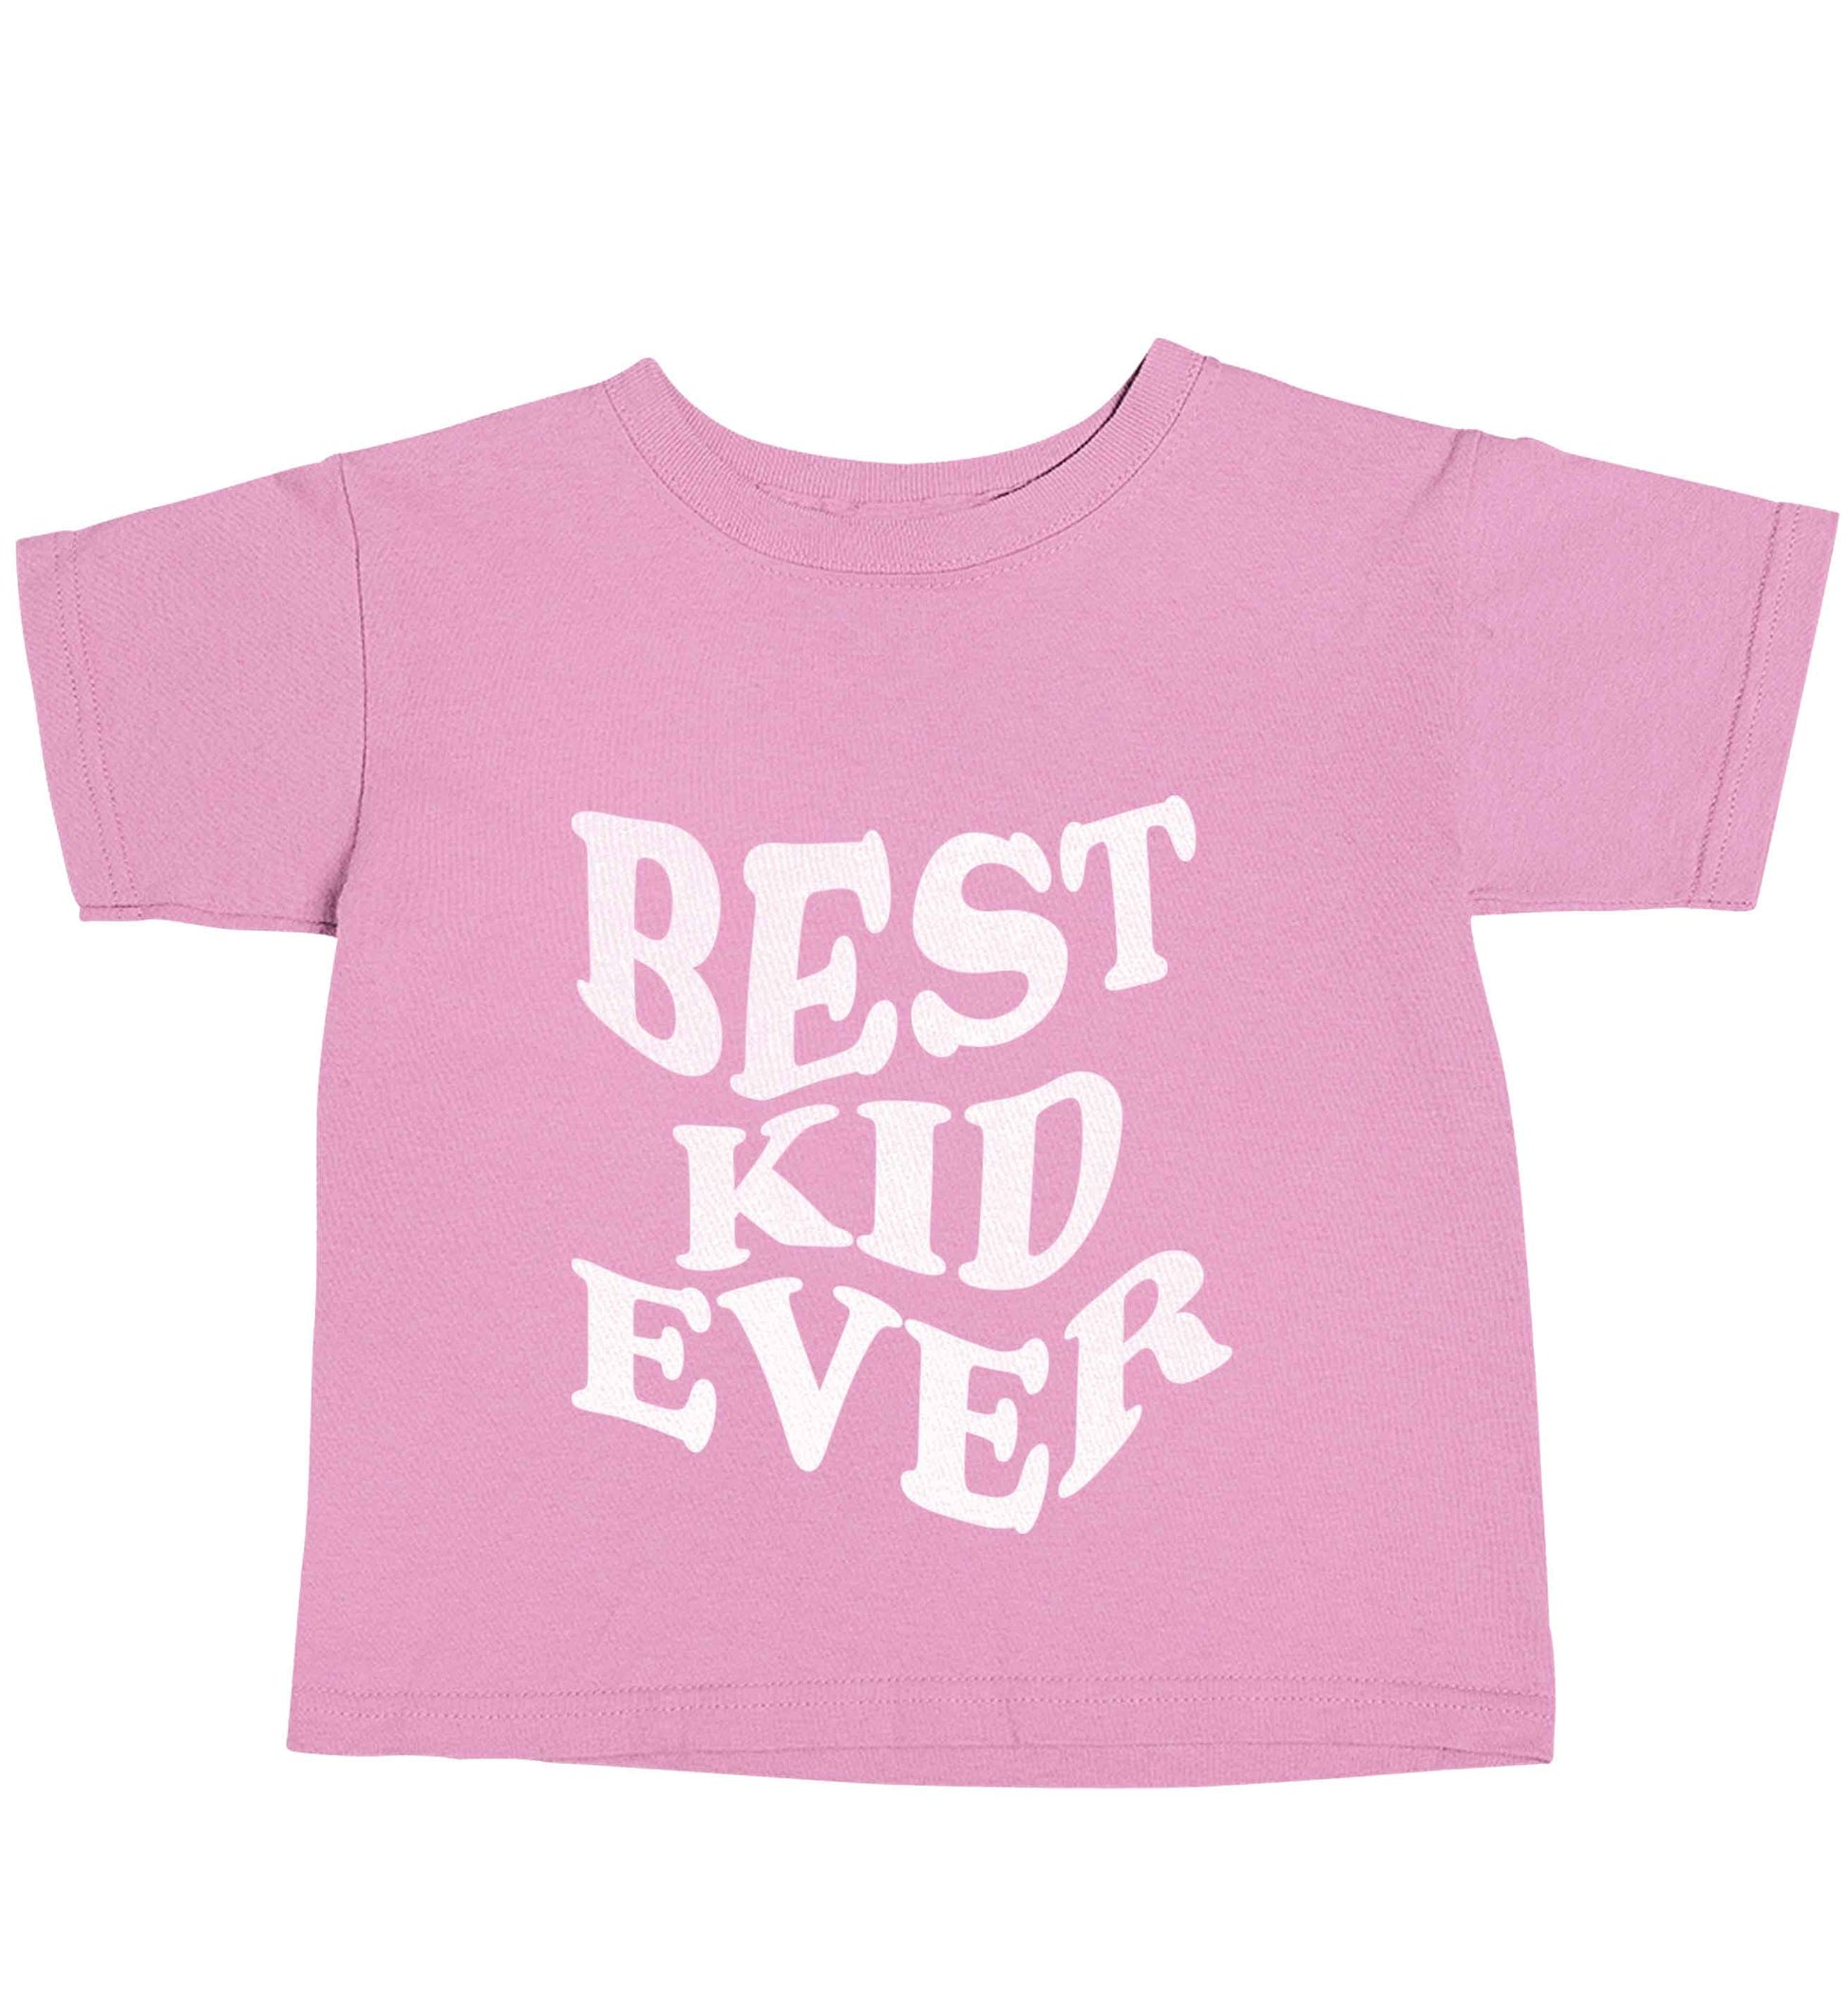 Best kid ever light pink baby toddler Tshirt 2 Years